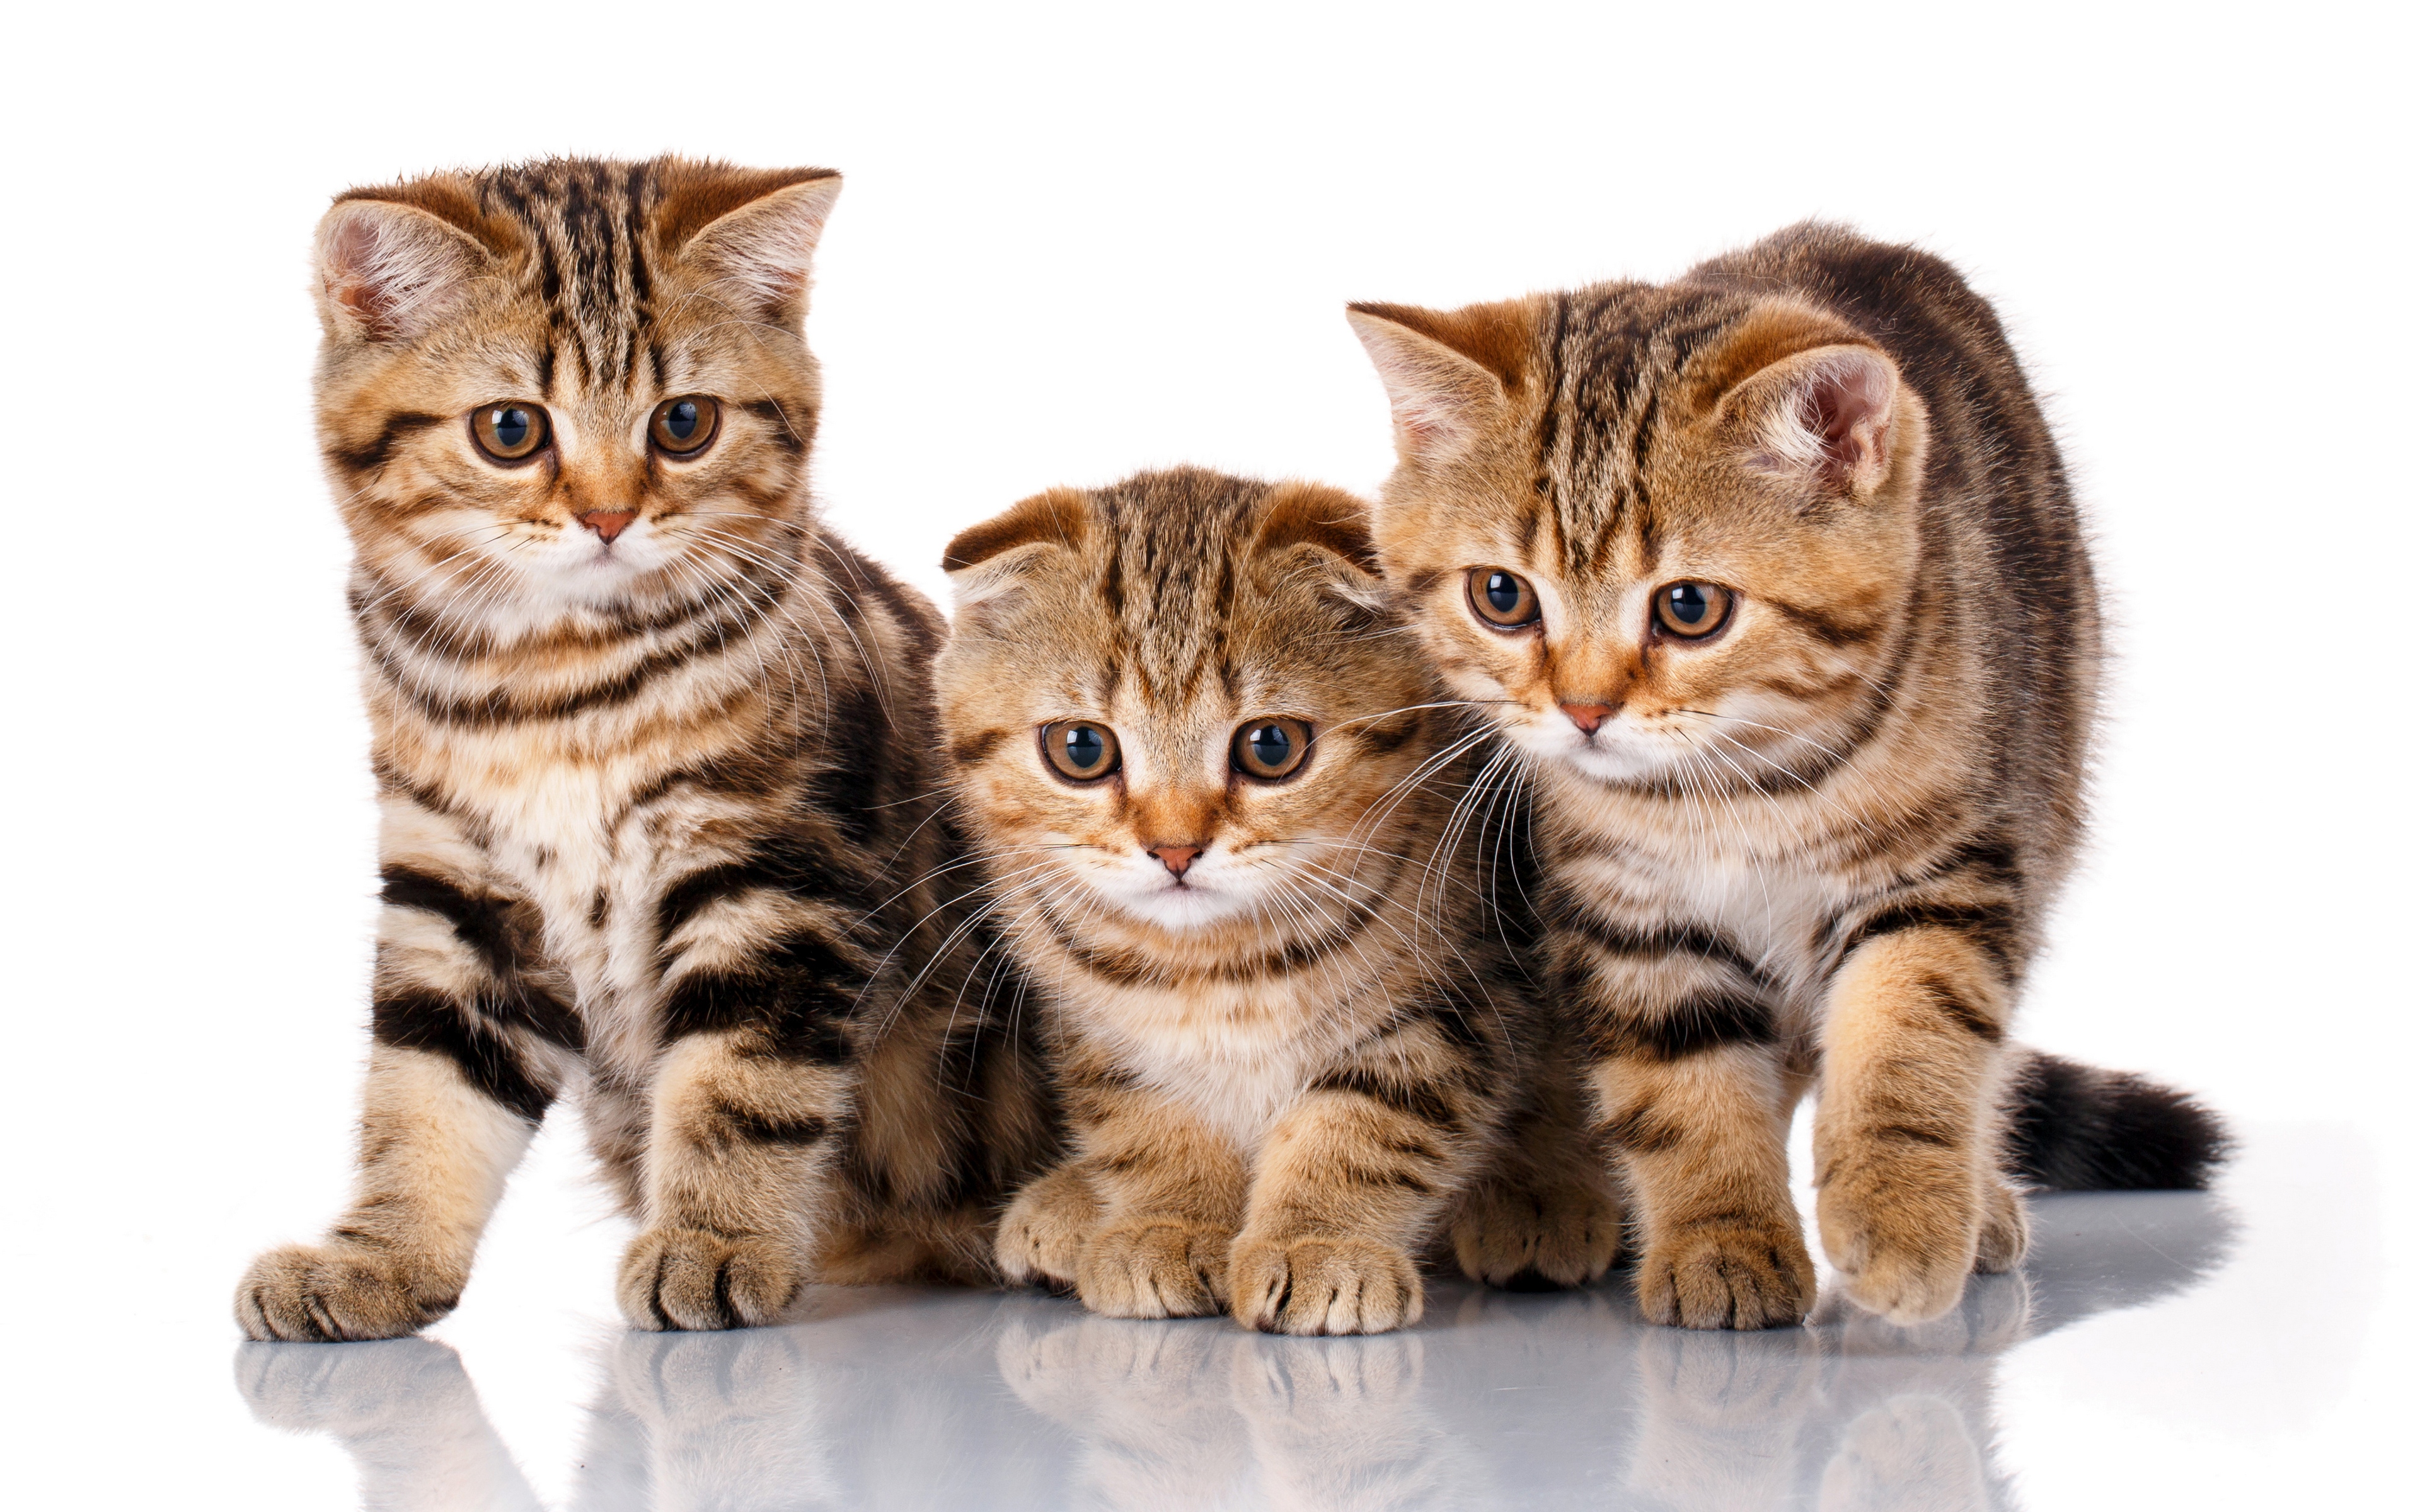 General 3840x2400 kittens cats animals mammals simple background reflection white background